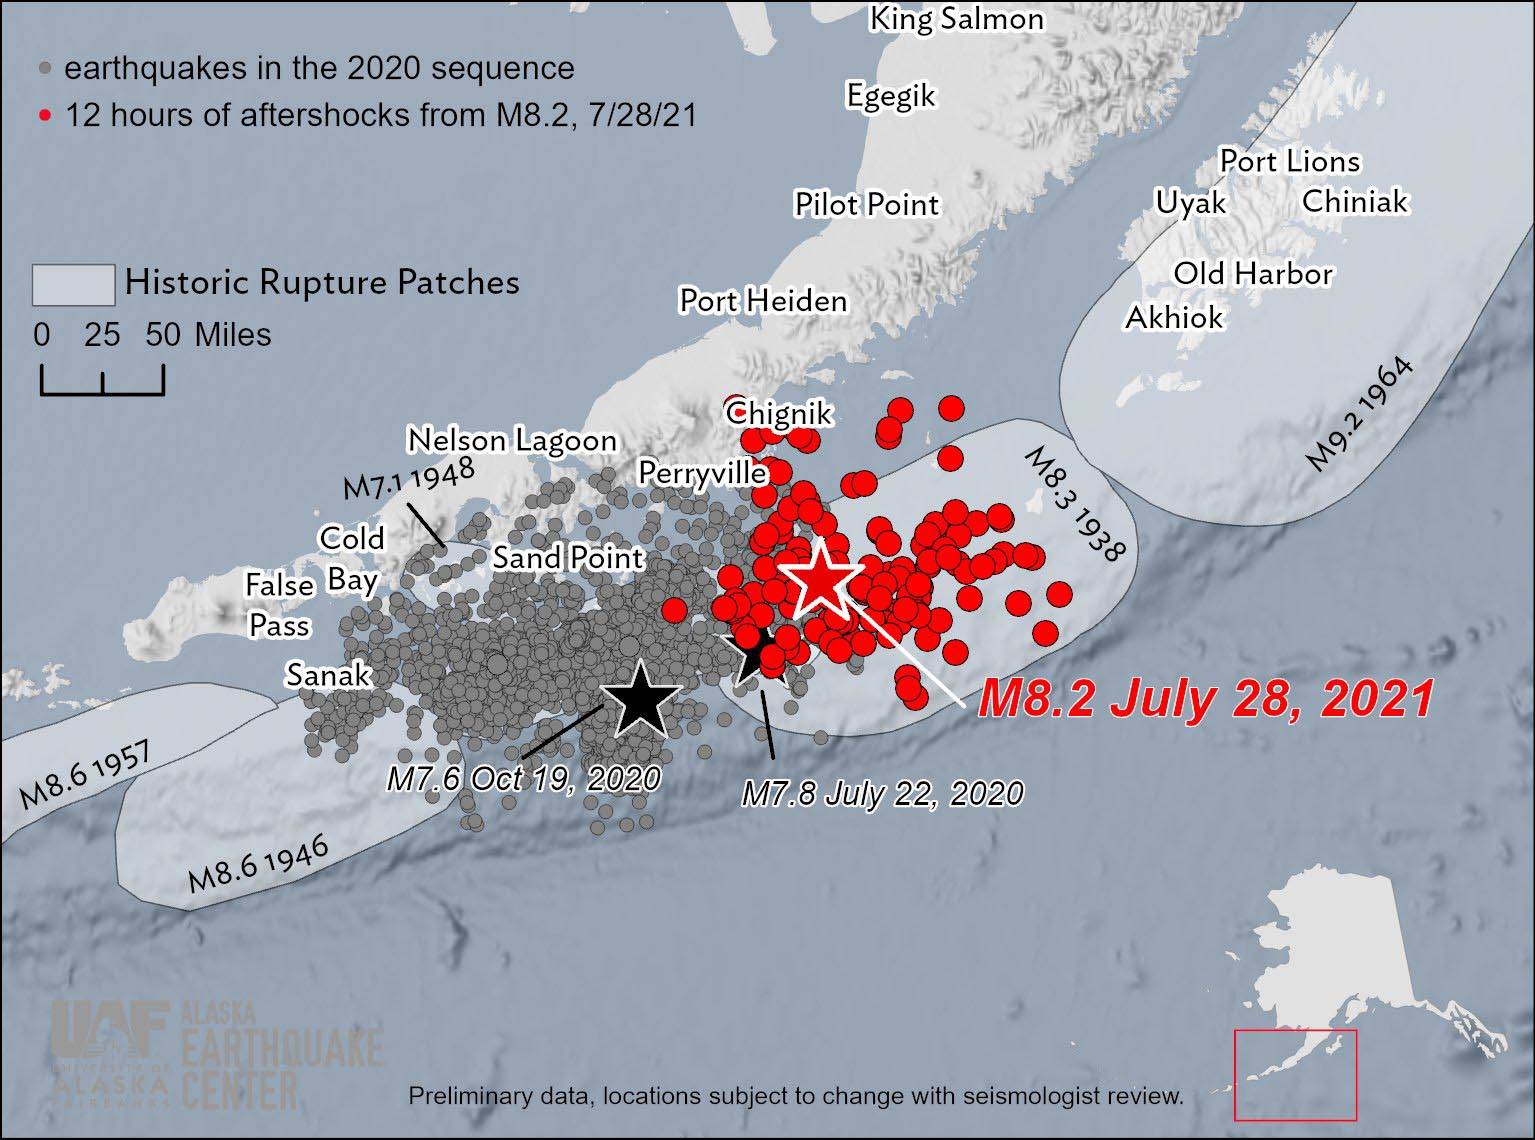 A graphic shared on the Alaska Earthquake Center’s Twitter feed shows the aftershocks of the magnitude 8.2 quake off the coast of Perryville, Alaska in red on July 28, 2021. The gray dots show the areas affected by earthquakes in 2020. (Photo courtesty of the Alaska Earthquake Center Twitter.)